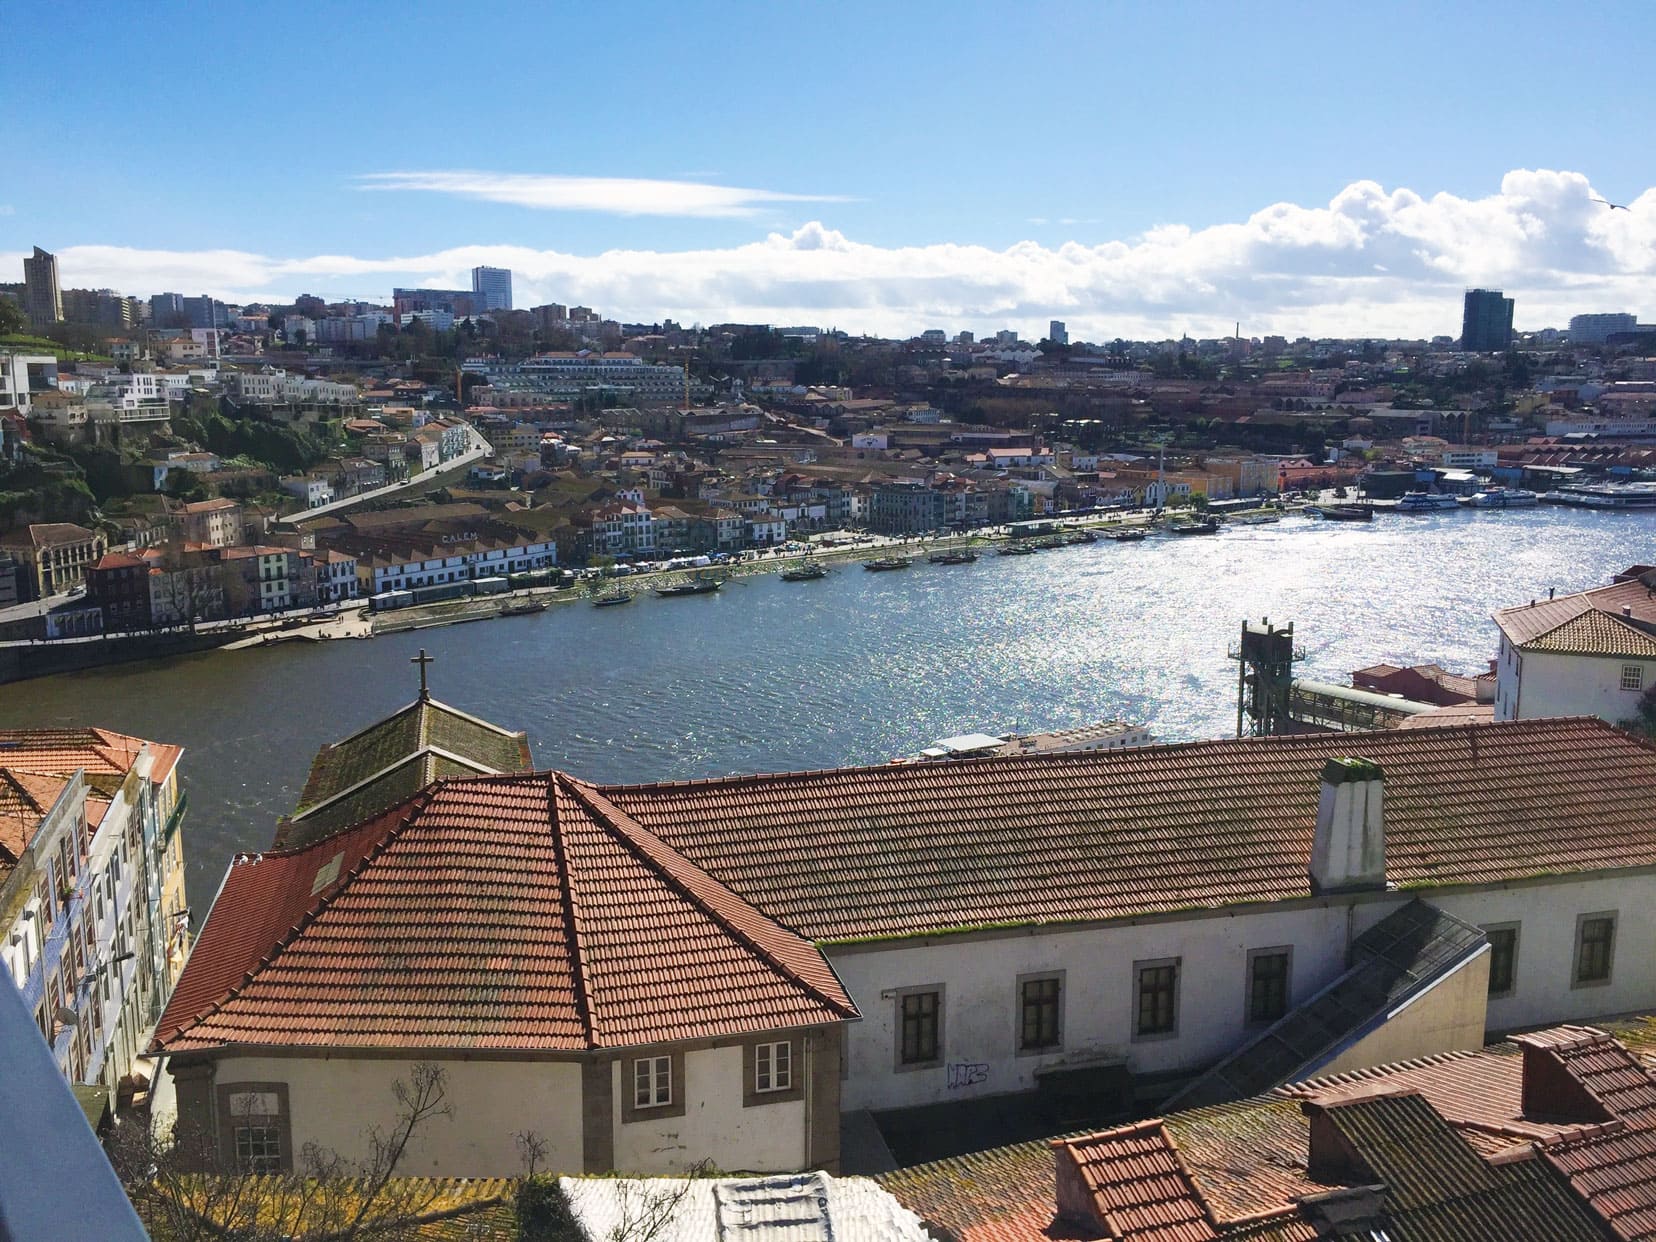 View of Douro River and roof tops